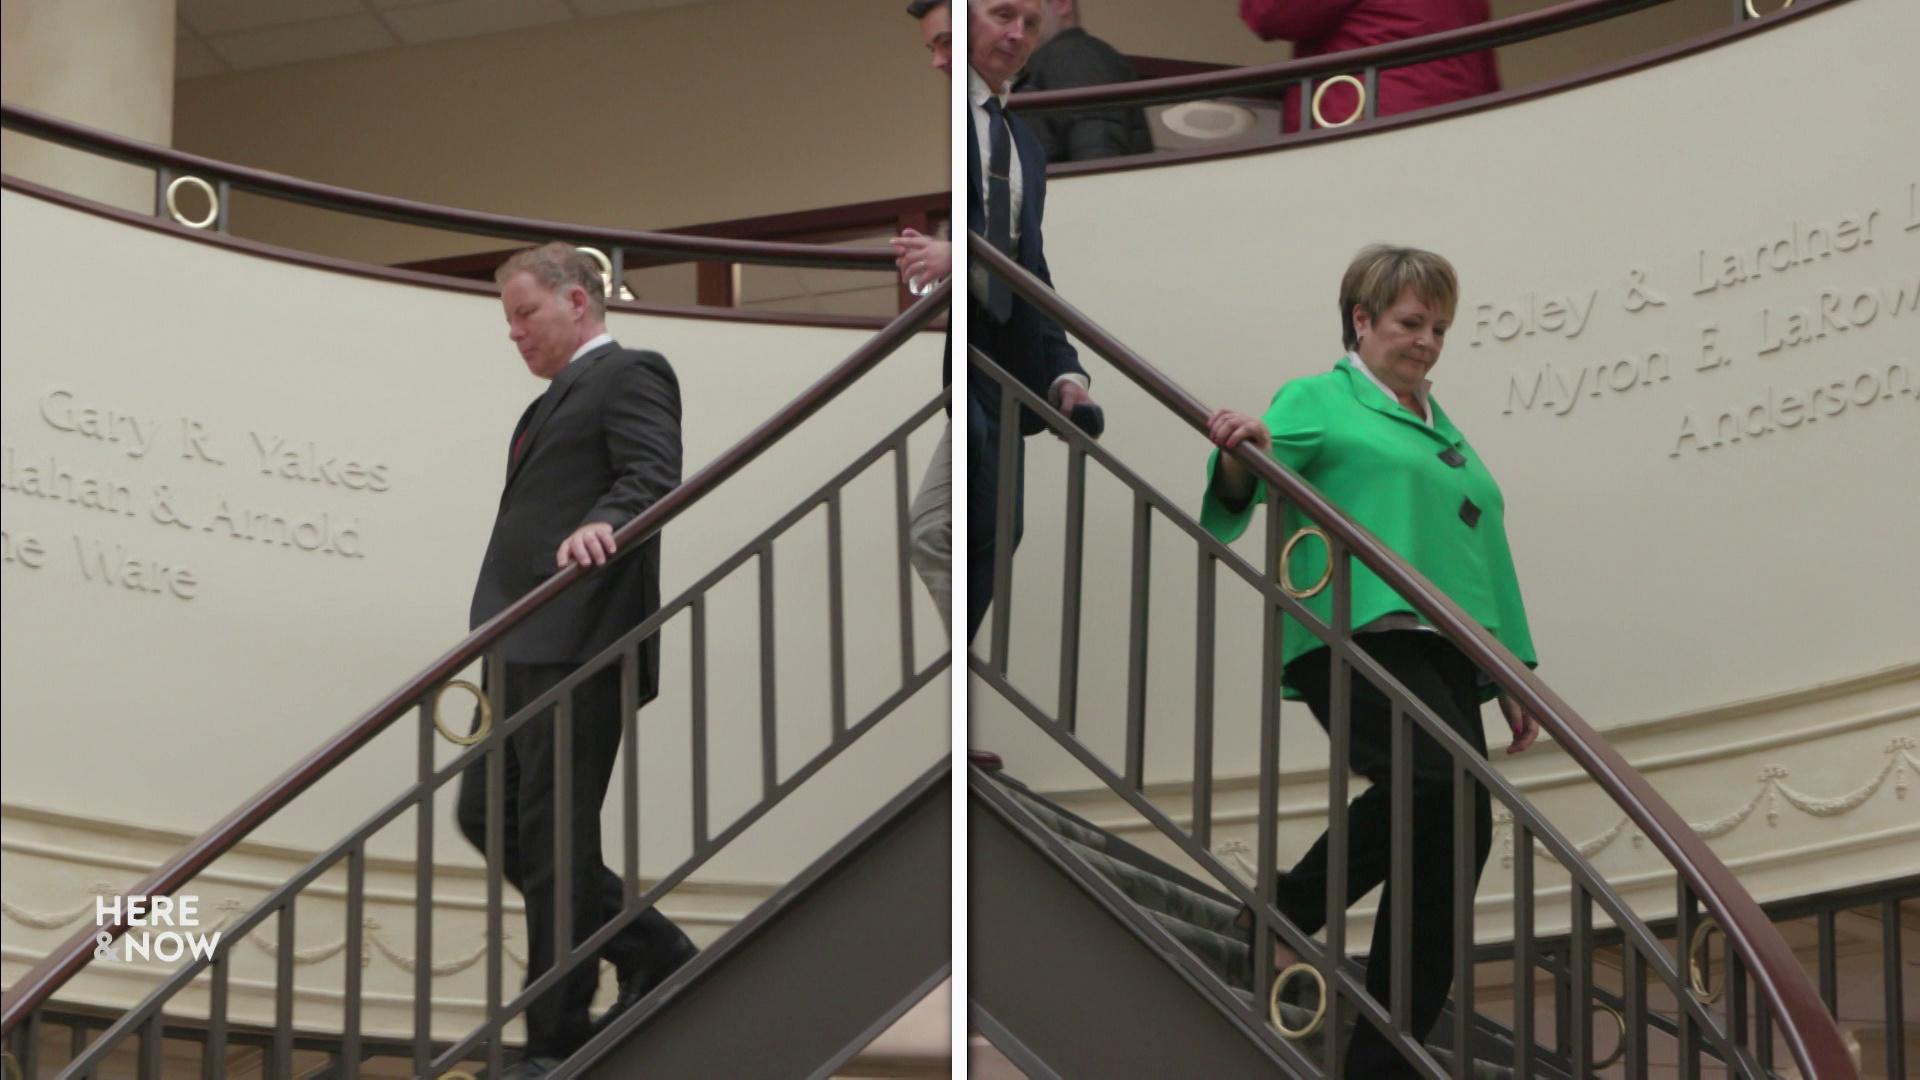 A graphic shows two side-by-side images of Daniel Kelly and Janet Protasiewicz descending a spiral staircase. 